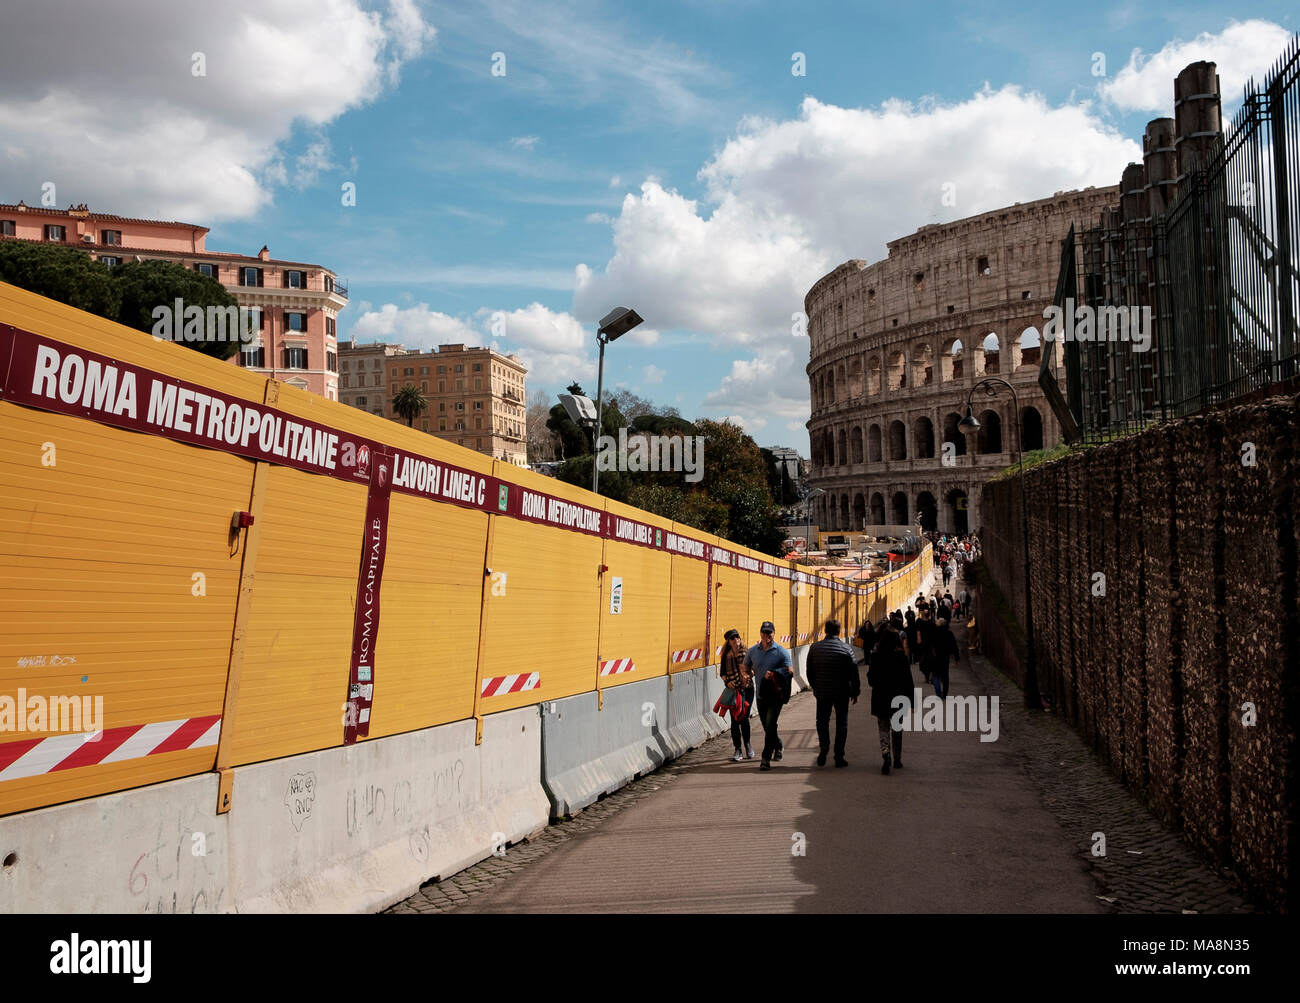 Building works in the surroundings of The Colosseum, Rome 2018 in connection with the building of Line C of the Rome Metro Stock Photo